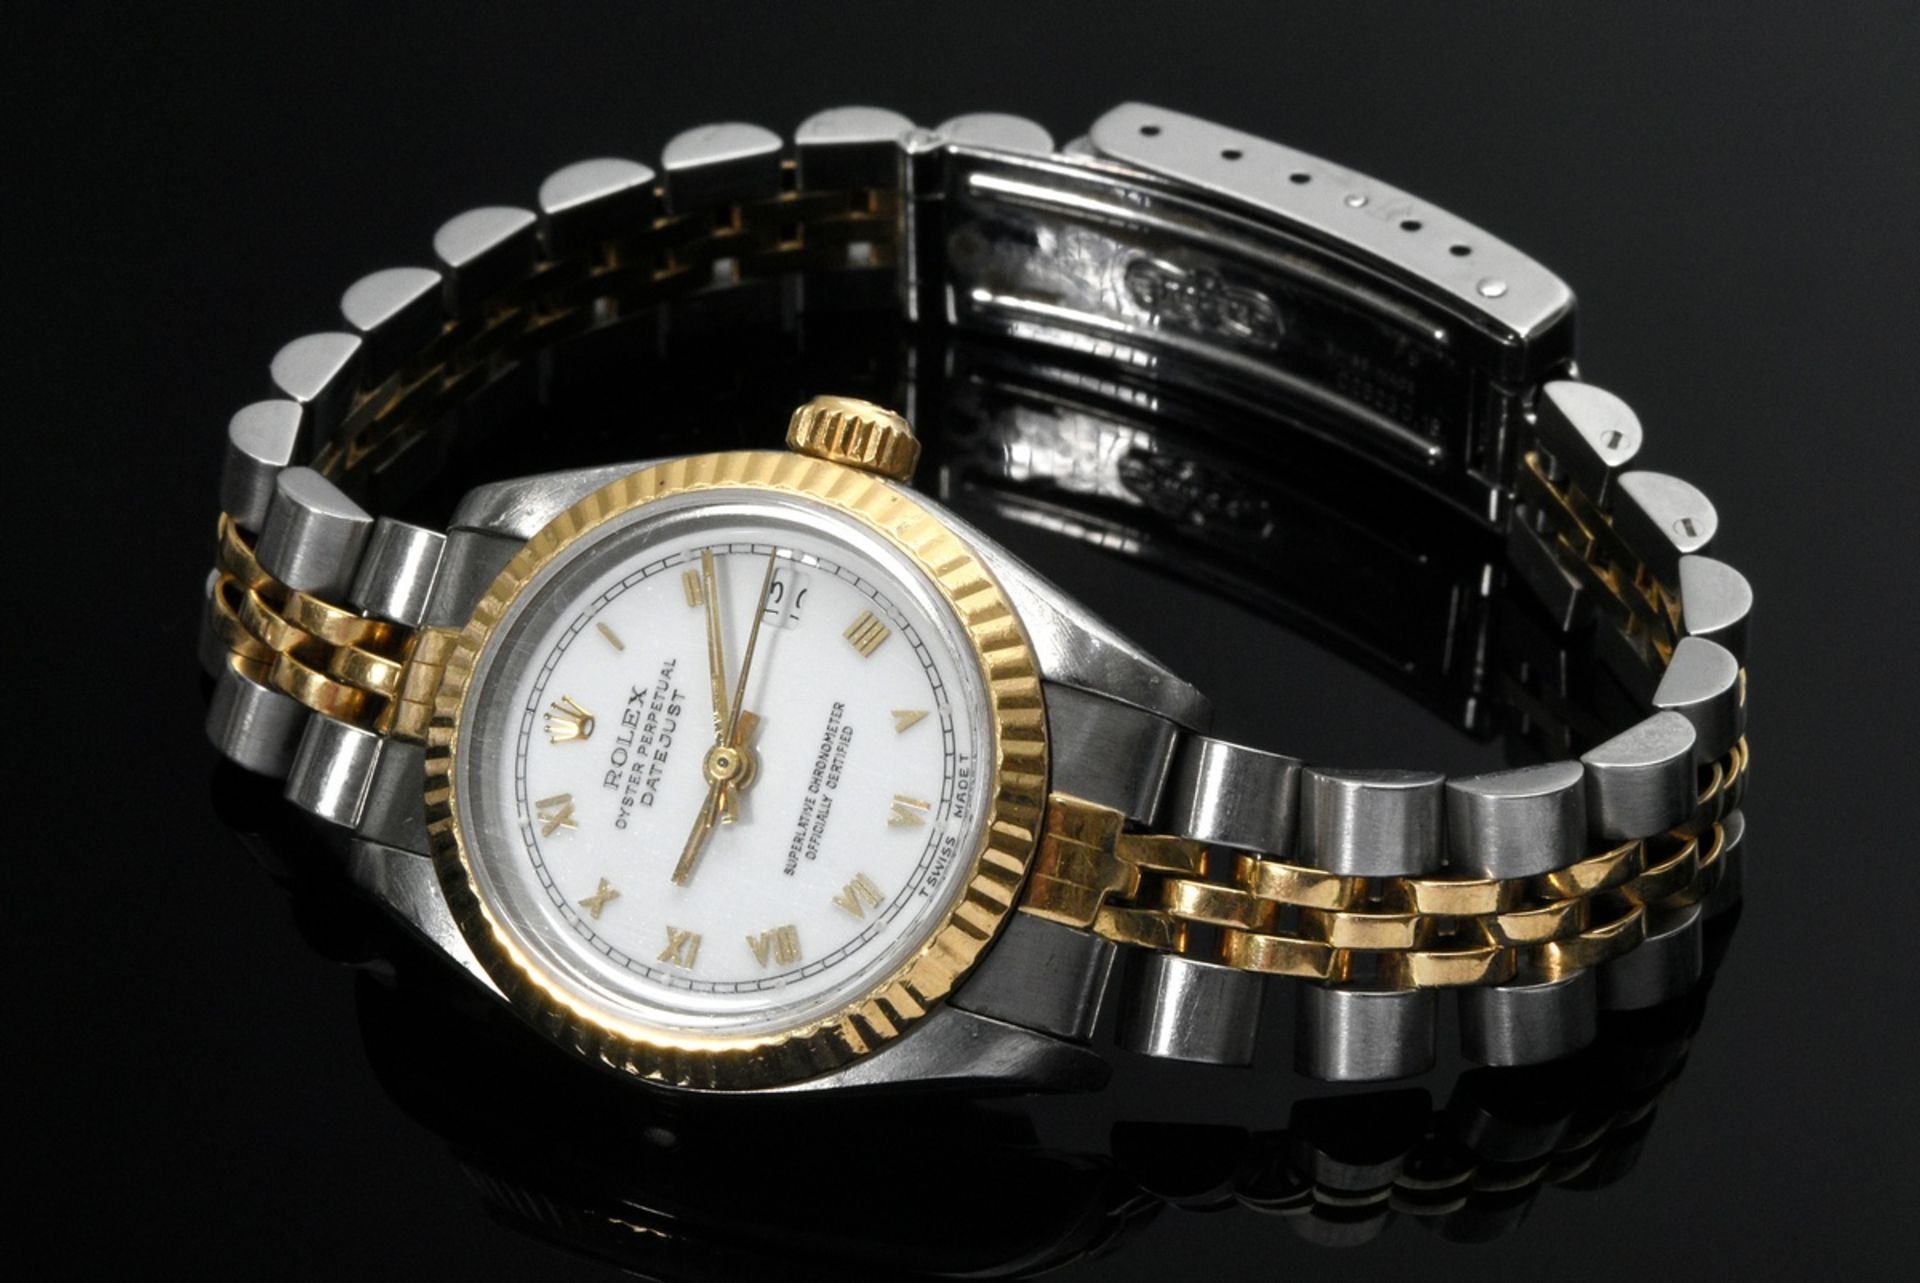 Stainless steel/yellow gold 750 Rolex "Oyster Perpetual Lady-Datejust", automatic movement, white d